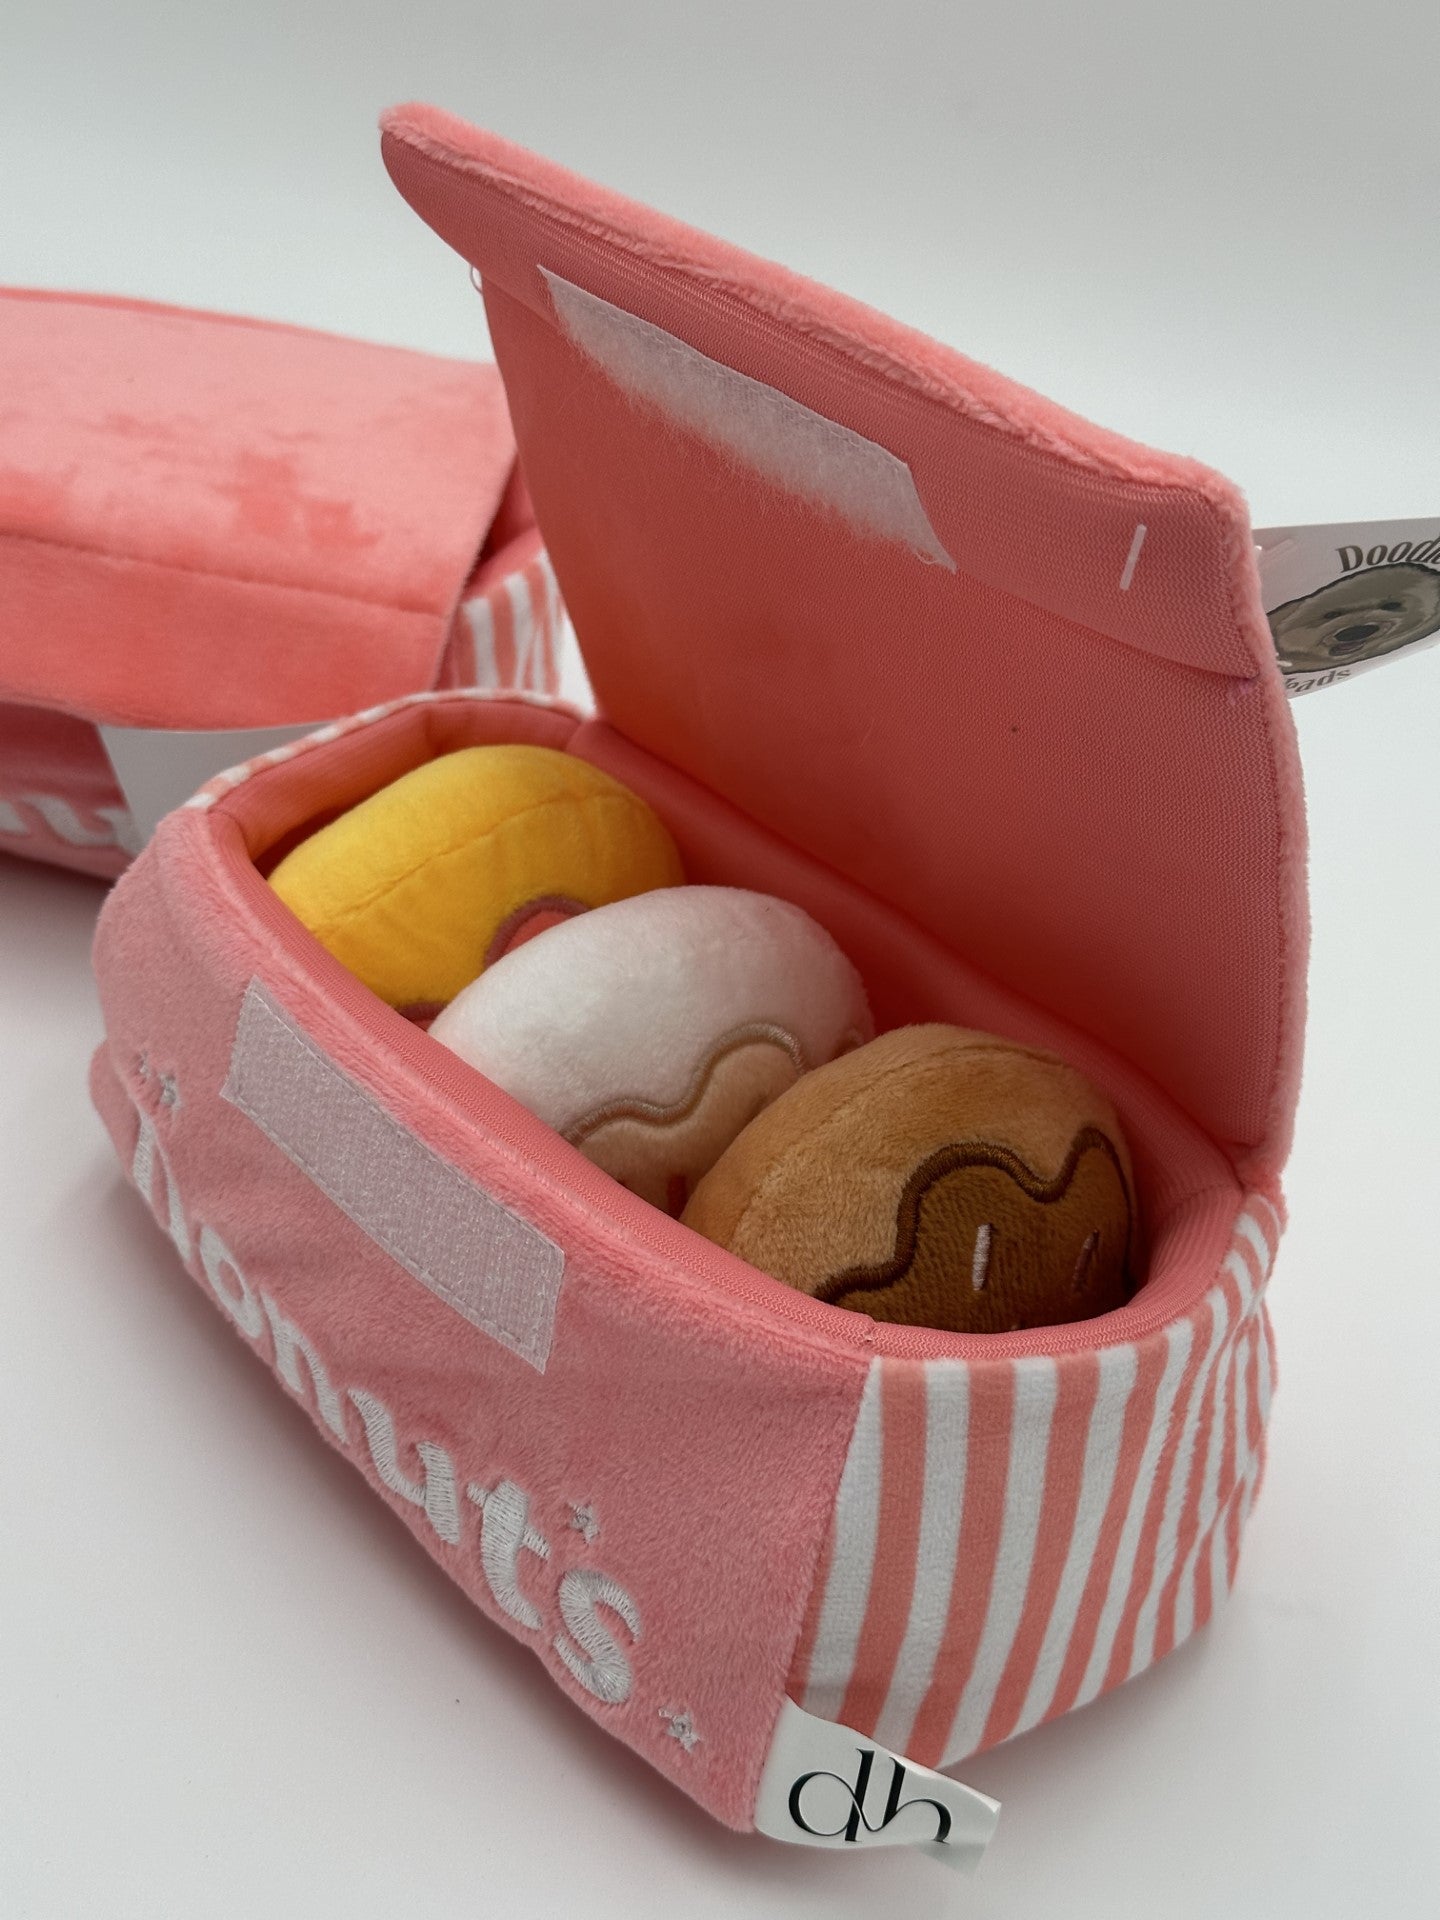 dh Doodle Head Box Of Squeaky Donuts for SMALL & MEDIUM Doodles